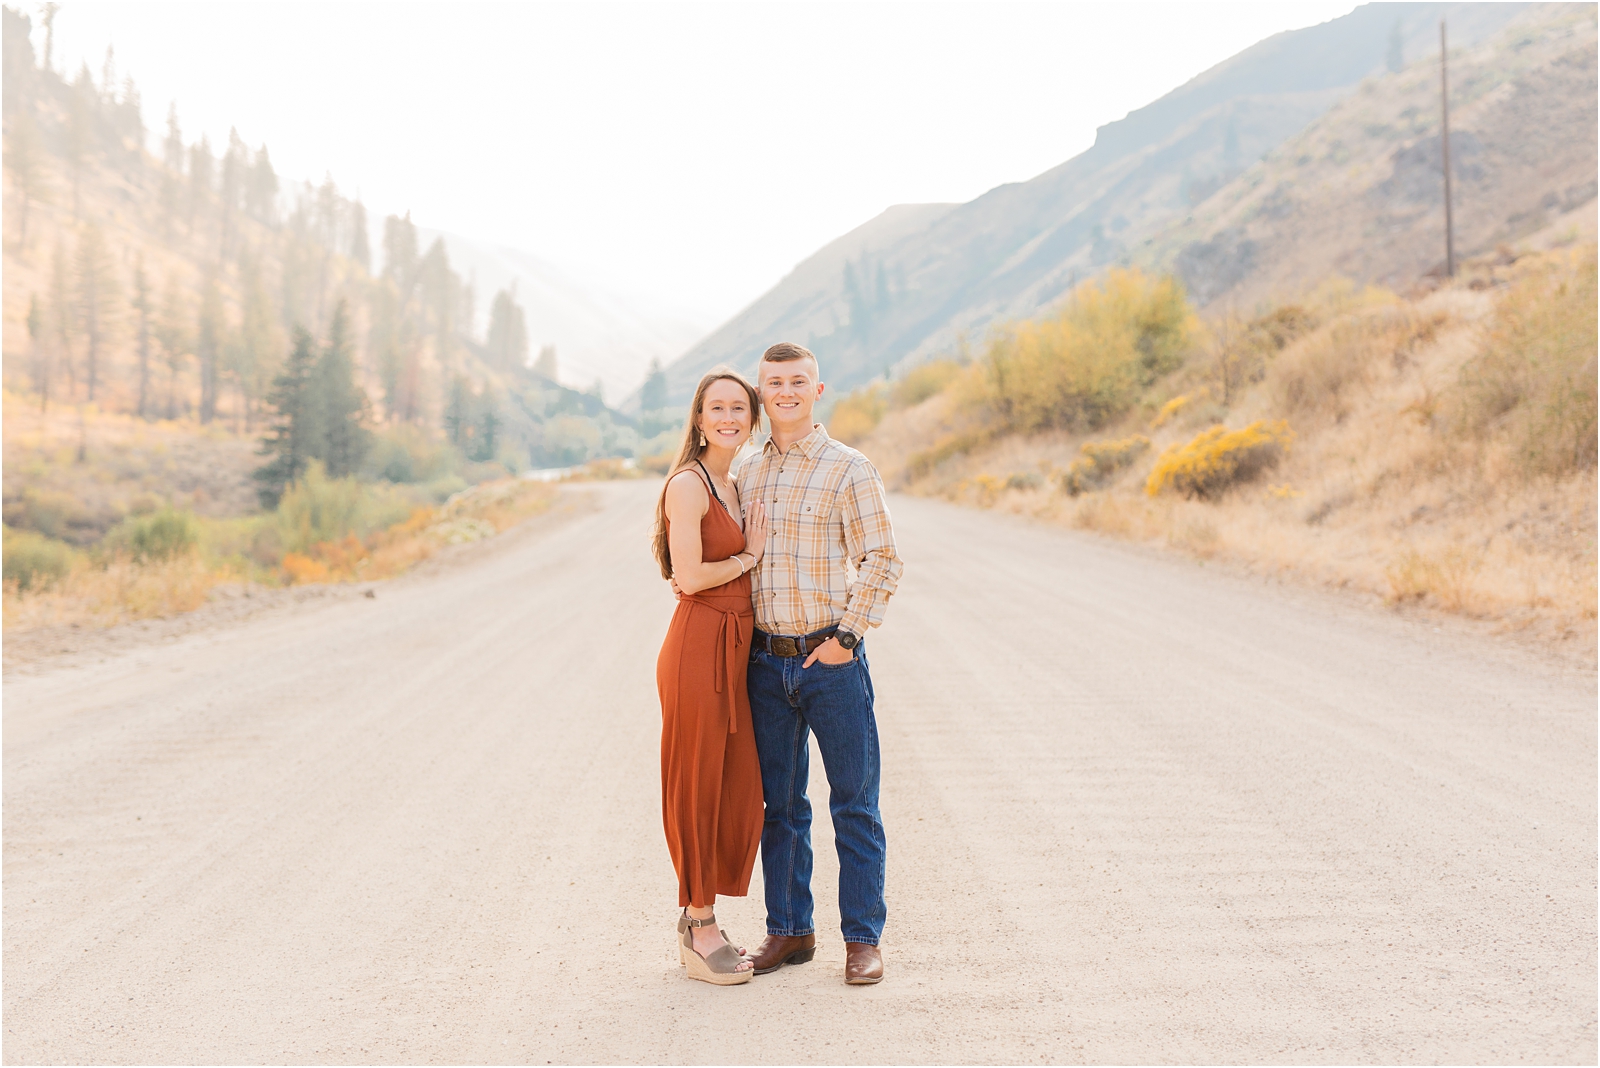 Couples' Photo Session in Pine Idaho. Wife in jumper, husband in plaid looking at camera smiling with mountains in the background.